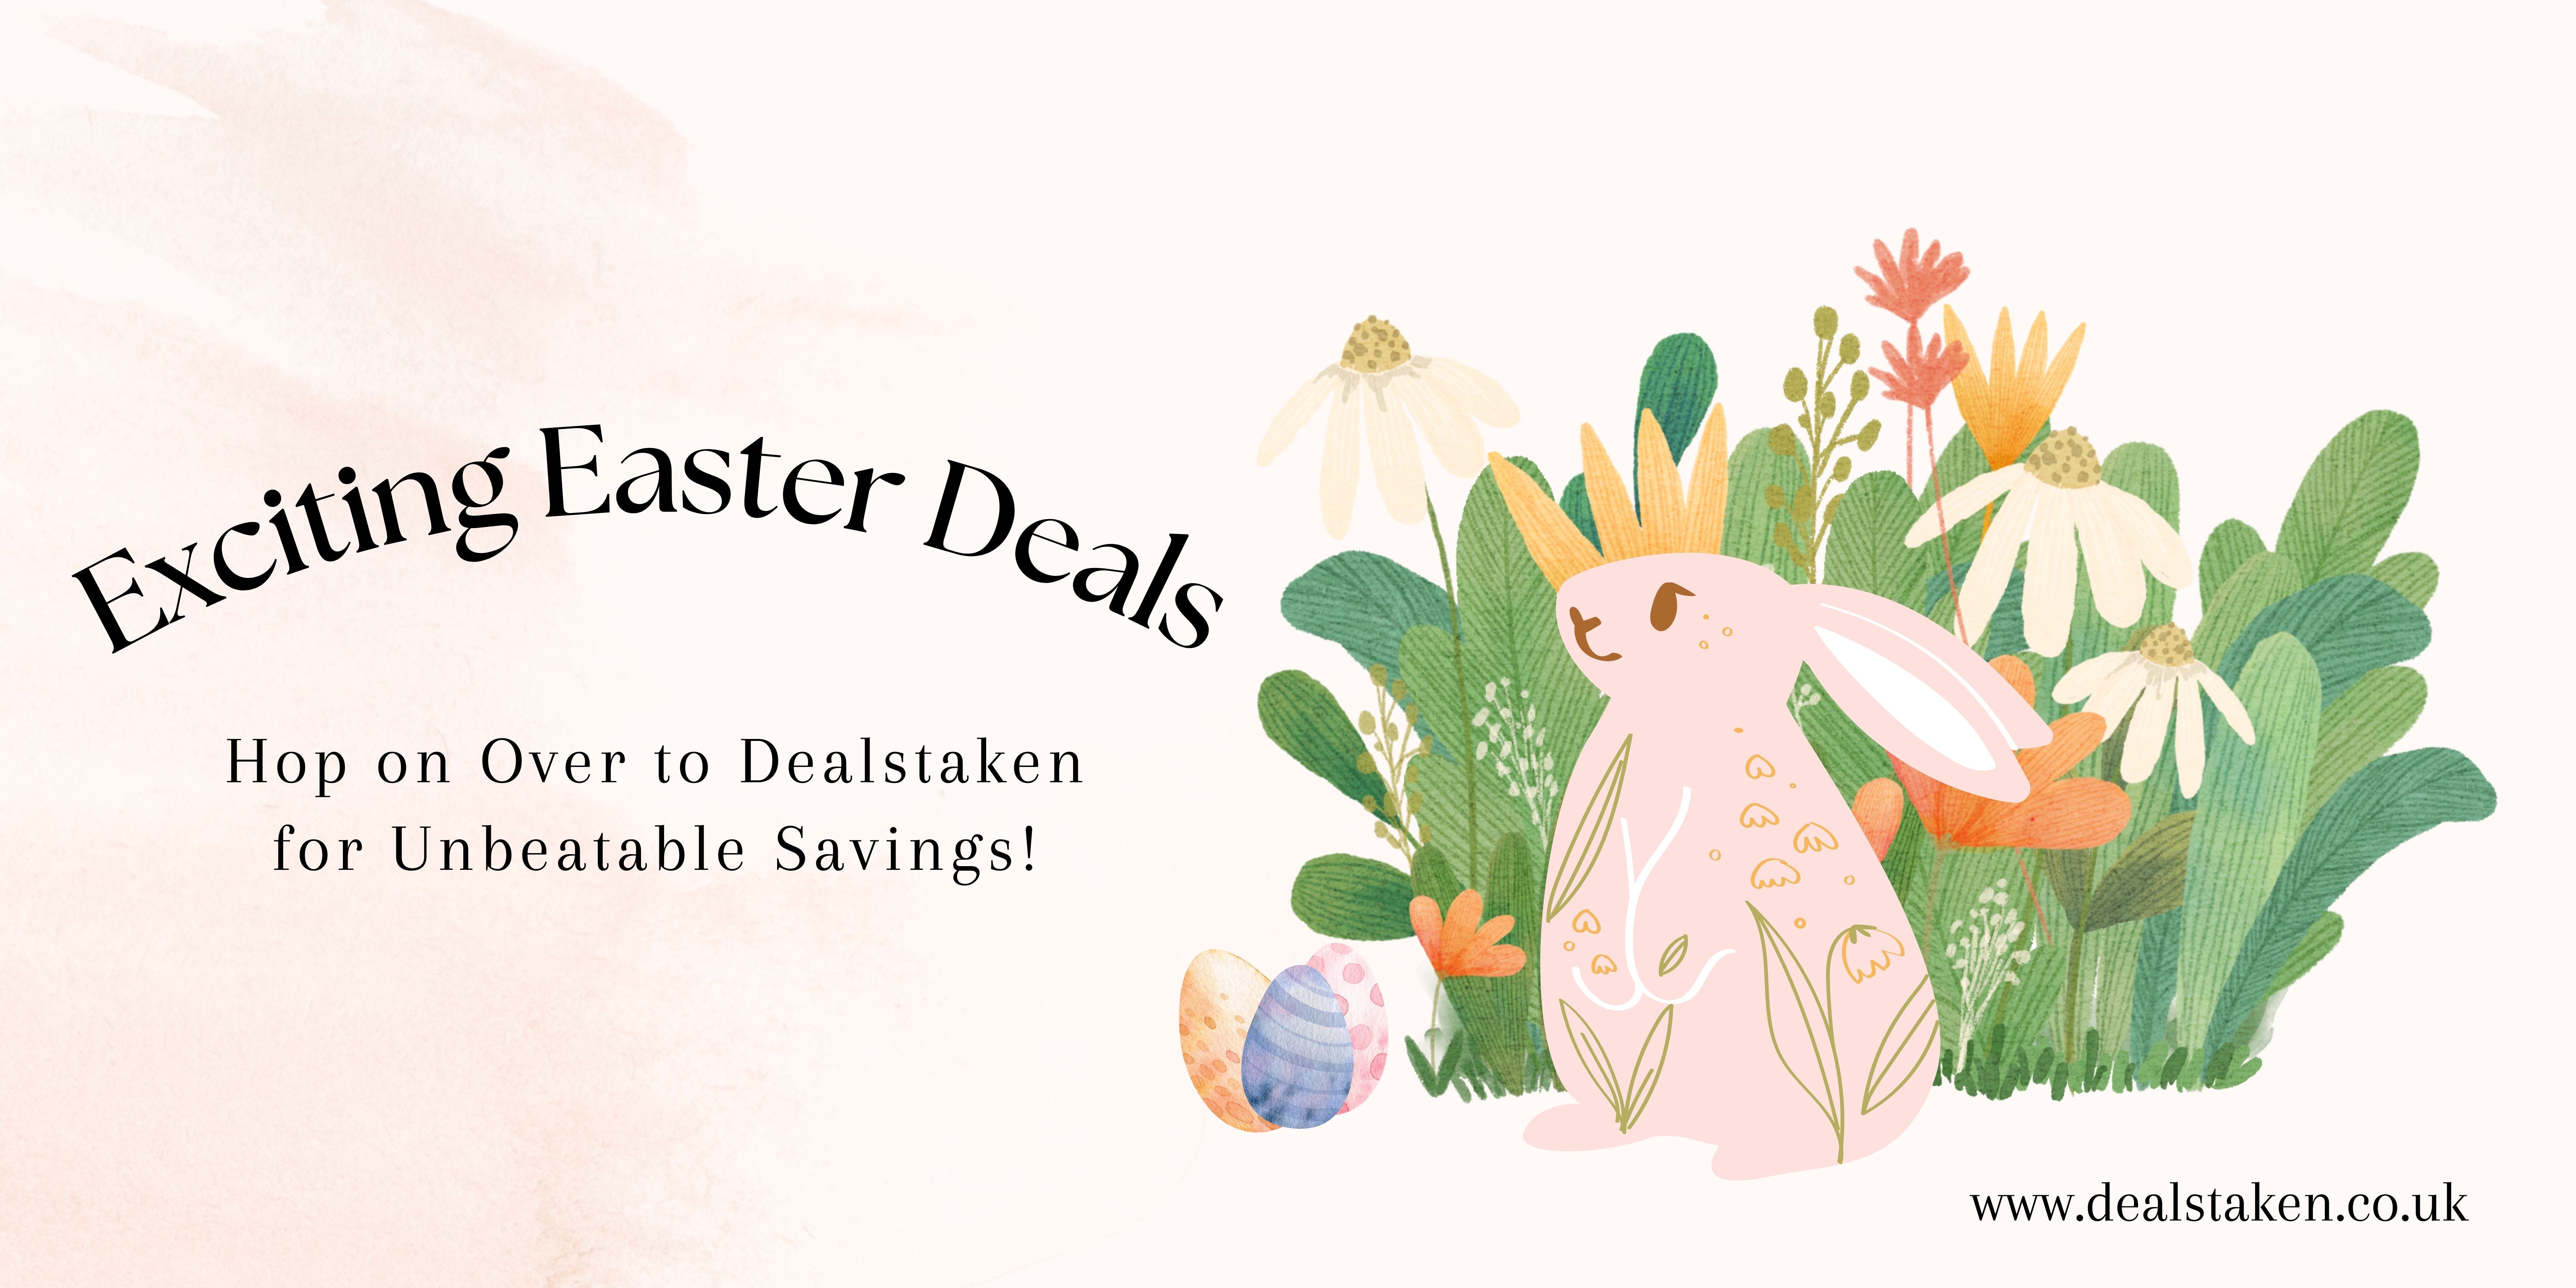 exciting-easter-deals-hop-on-over-to-dealstaken-for-unbeatable-savings